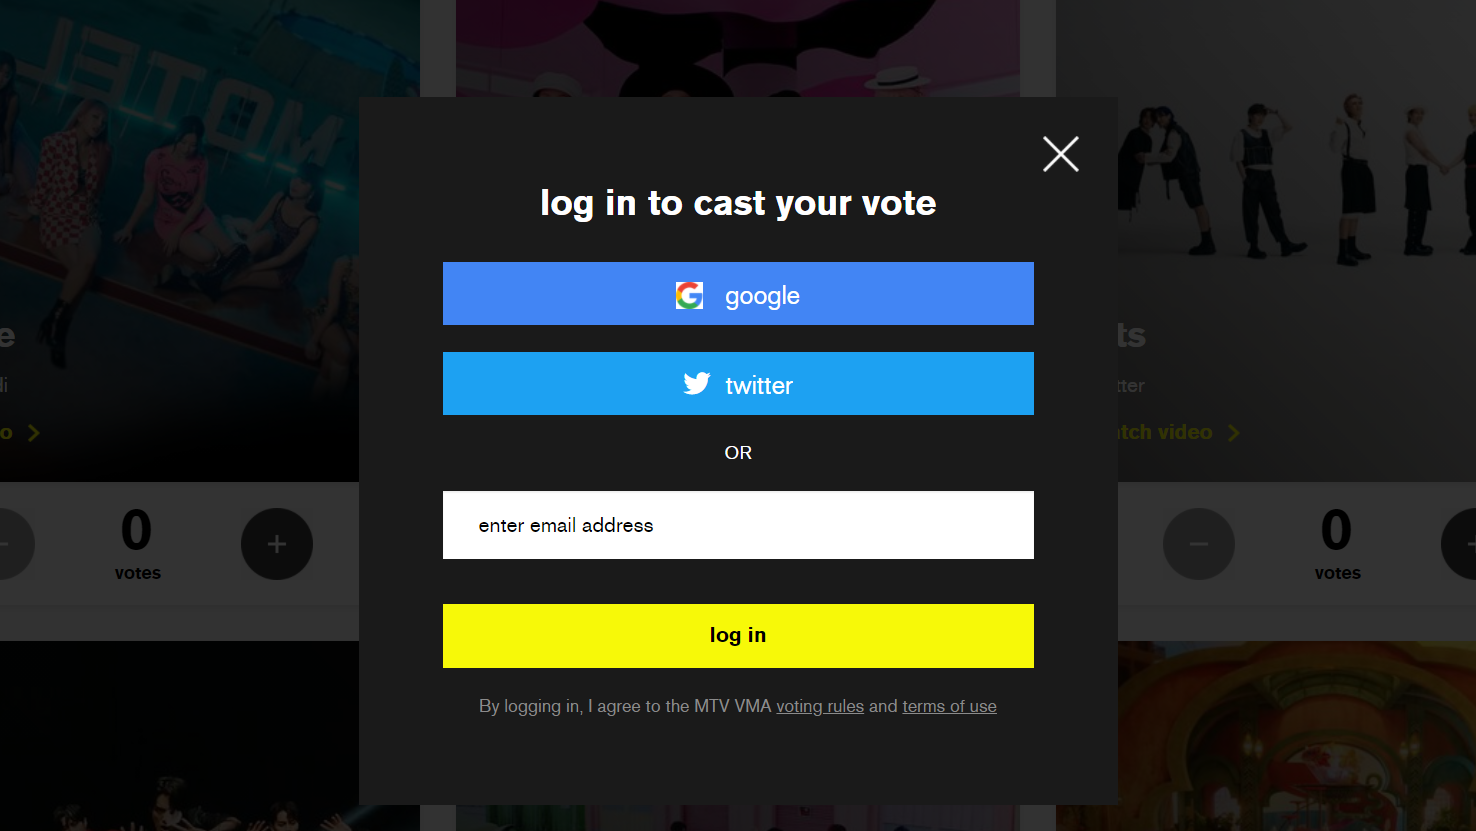 log in to cast your vote on MTV's website